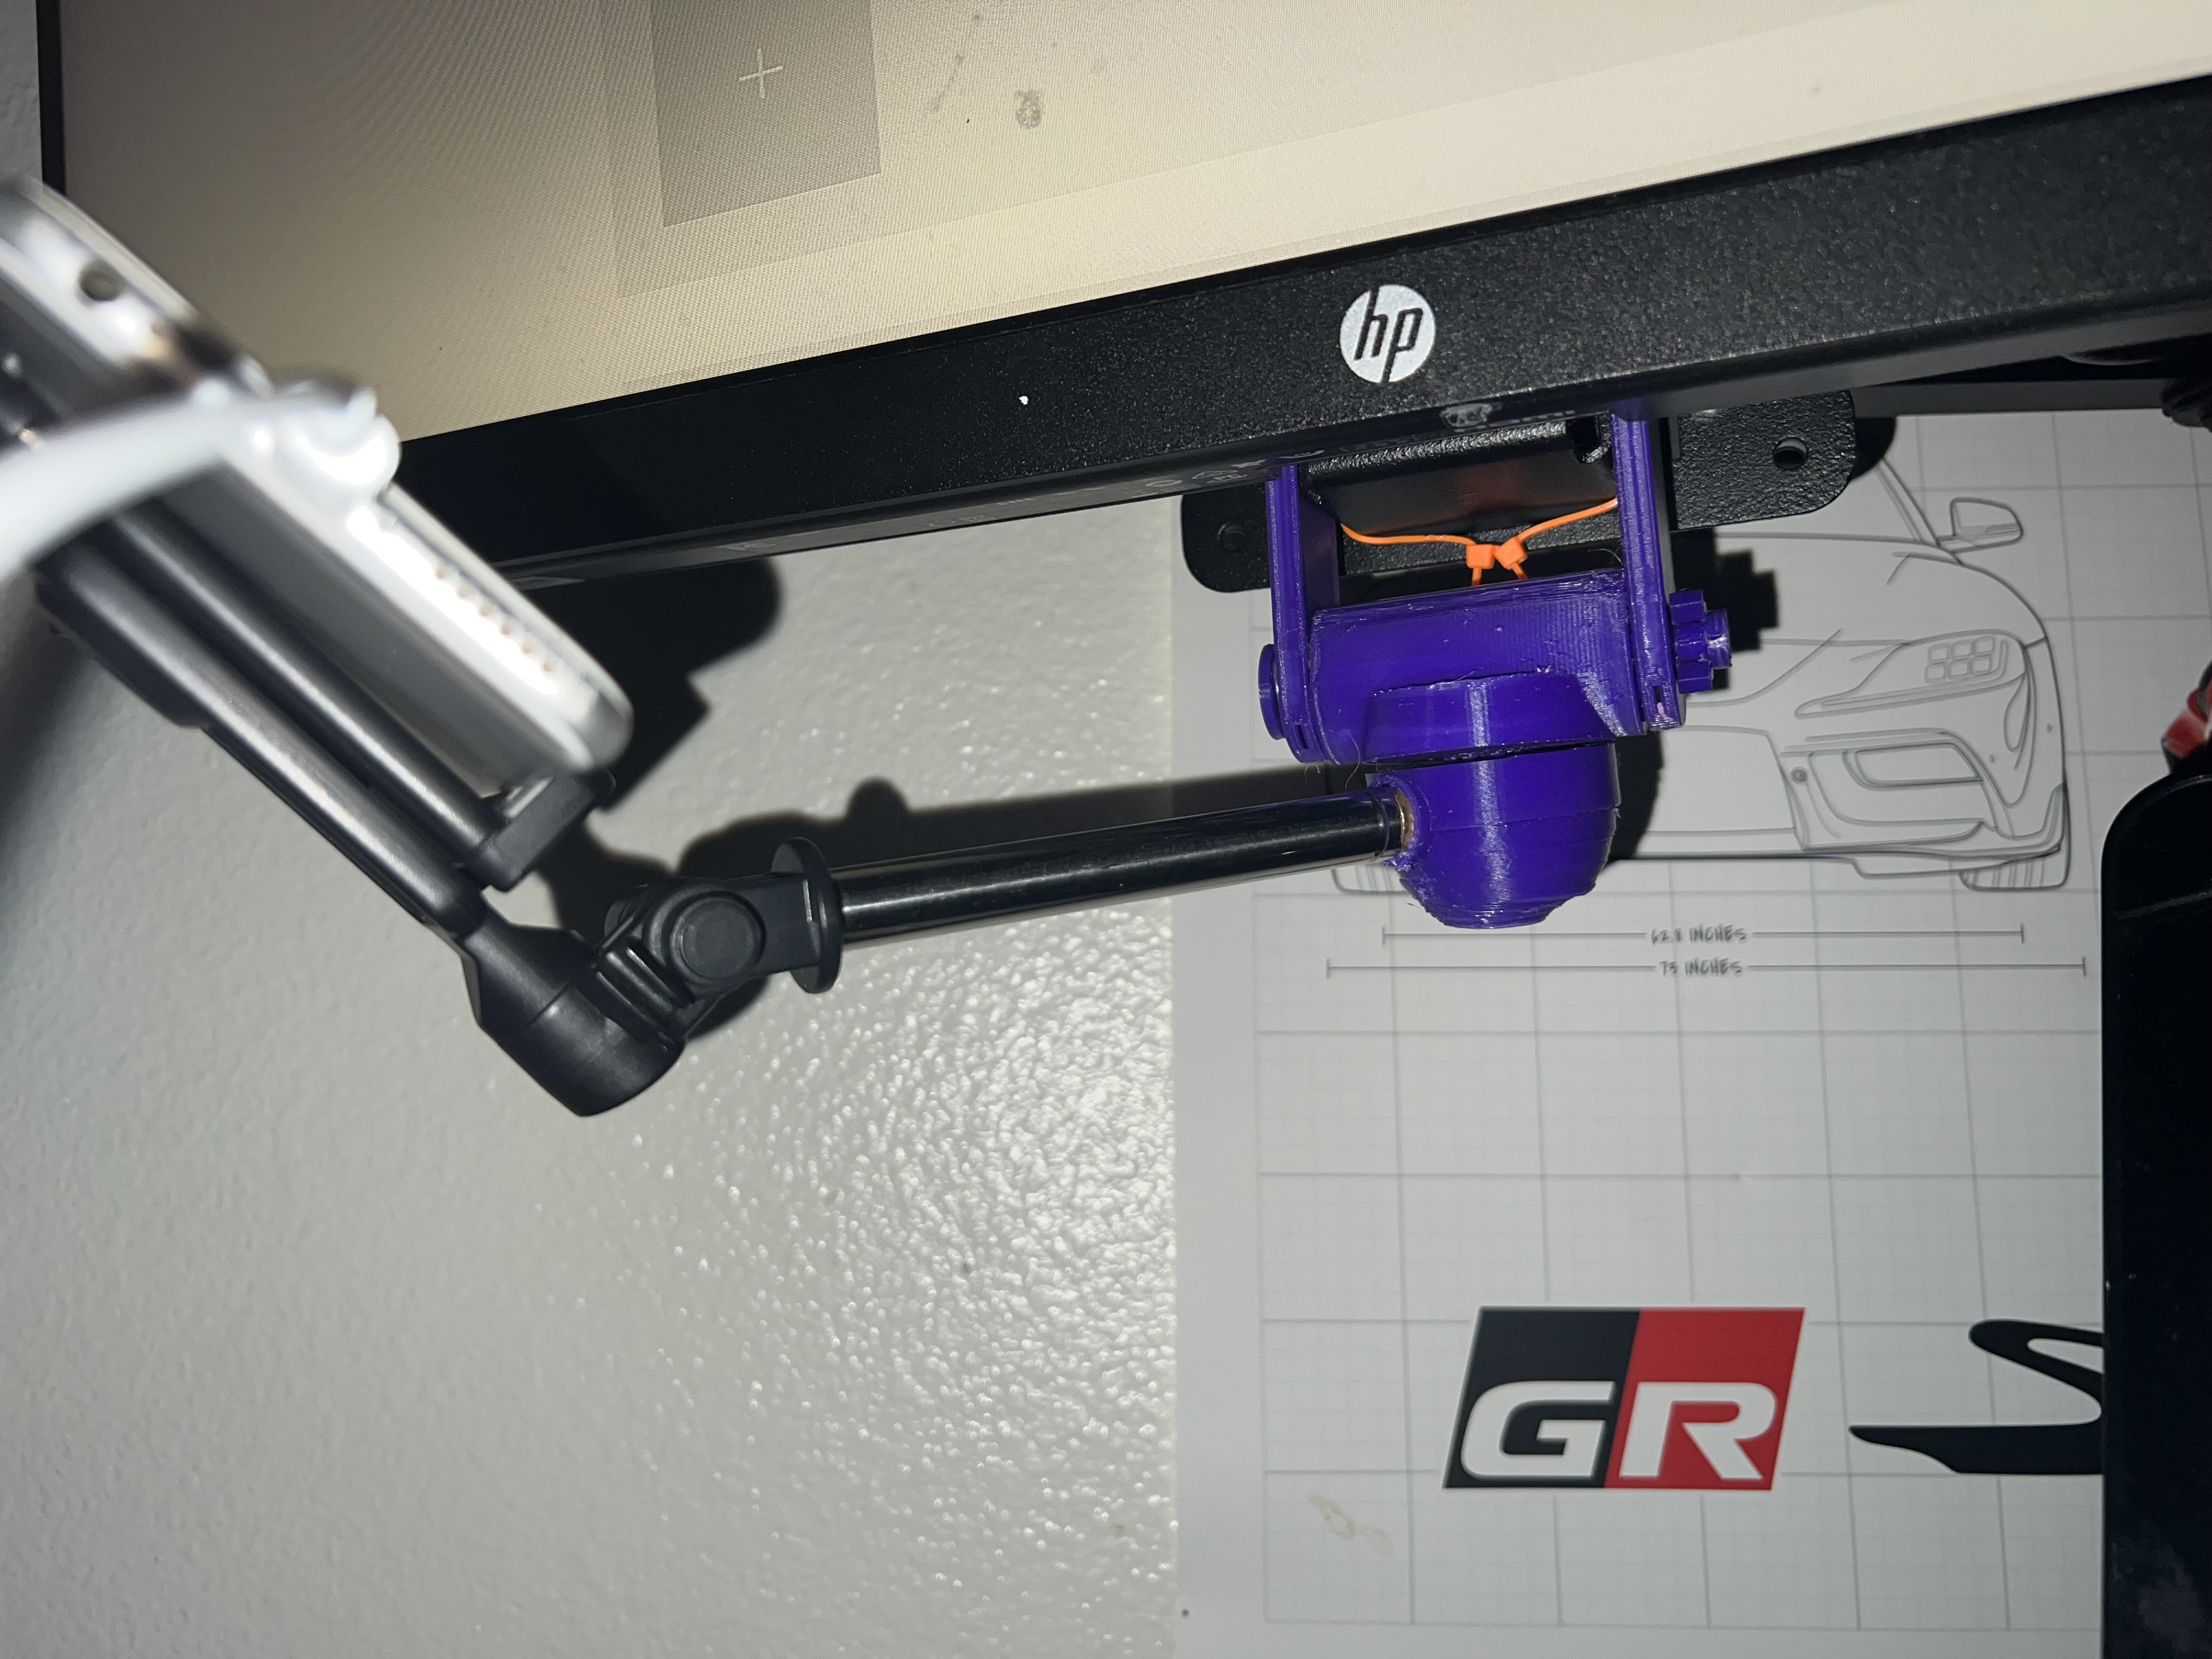 Obscure under-monitor rotating mount (intended as phone mount)